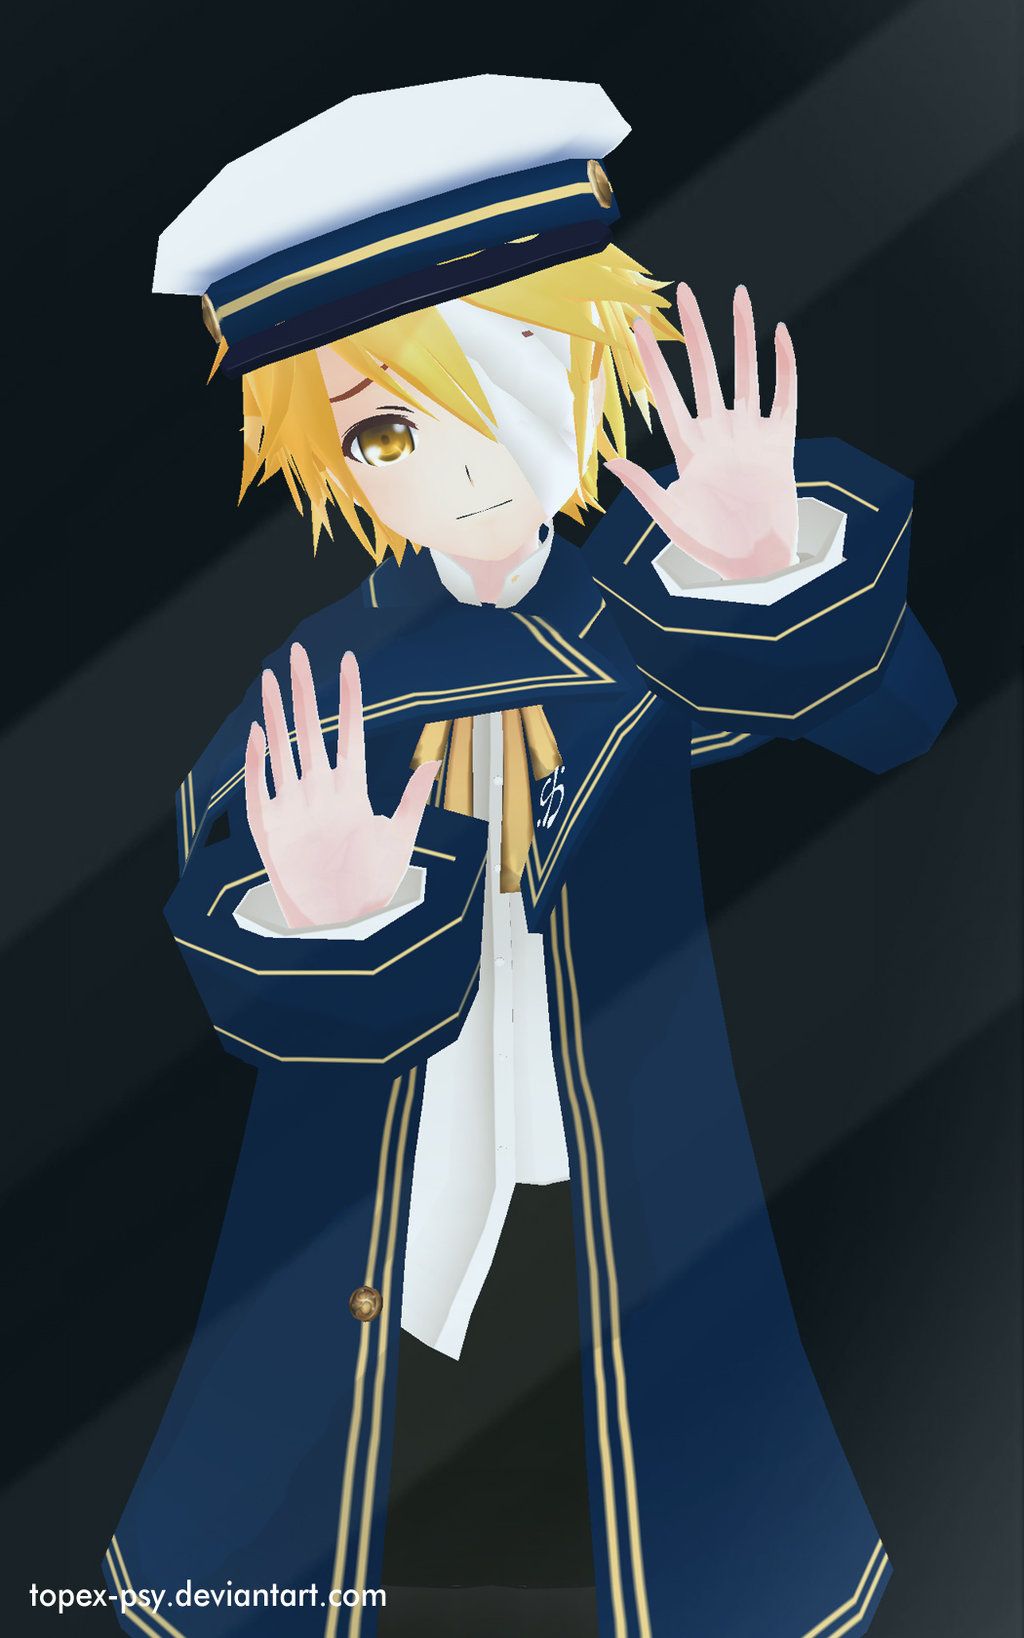 Oliver Vocaloid Iphone Wallpapers Wallpaper Cave